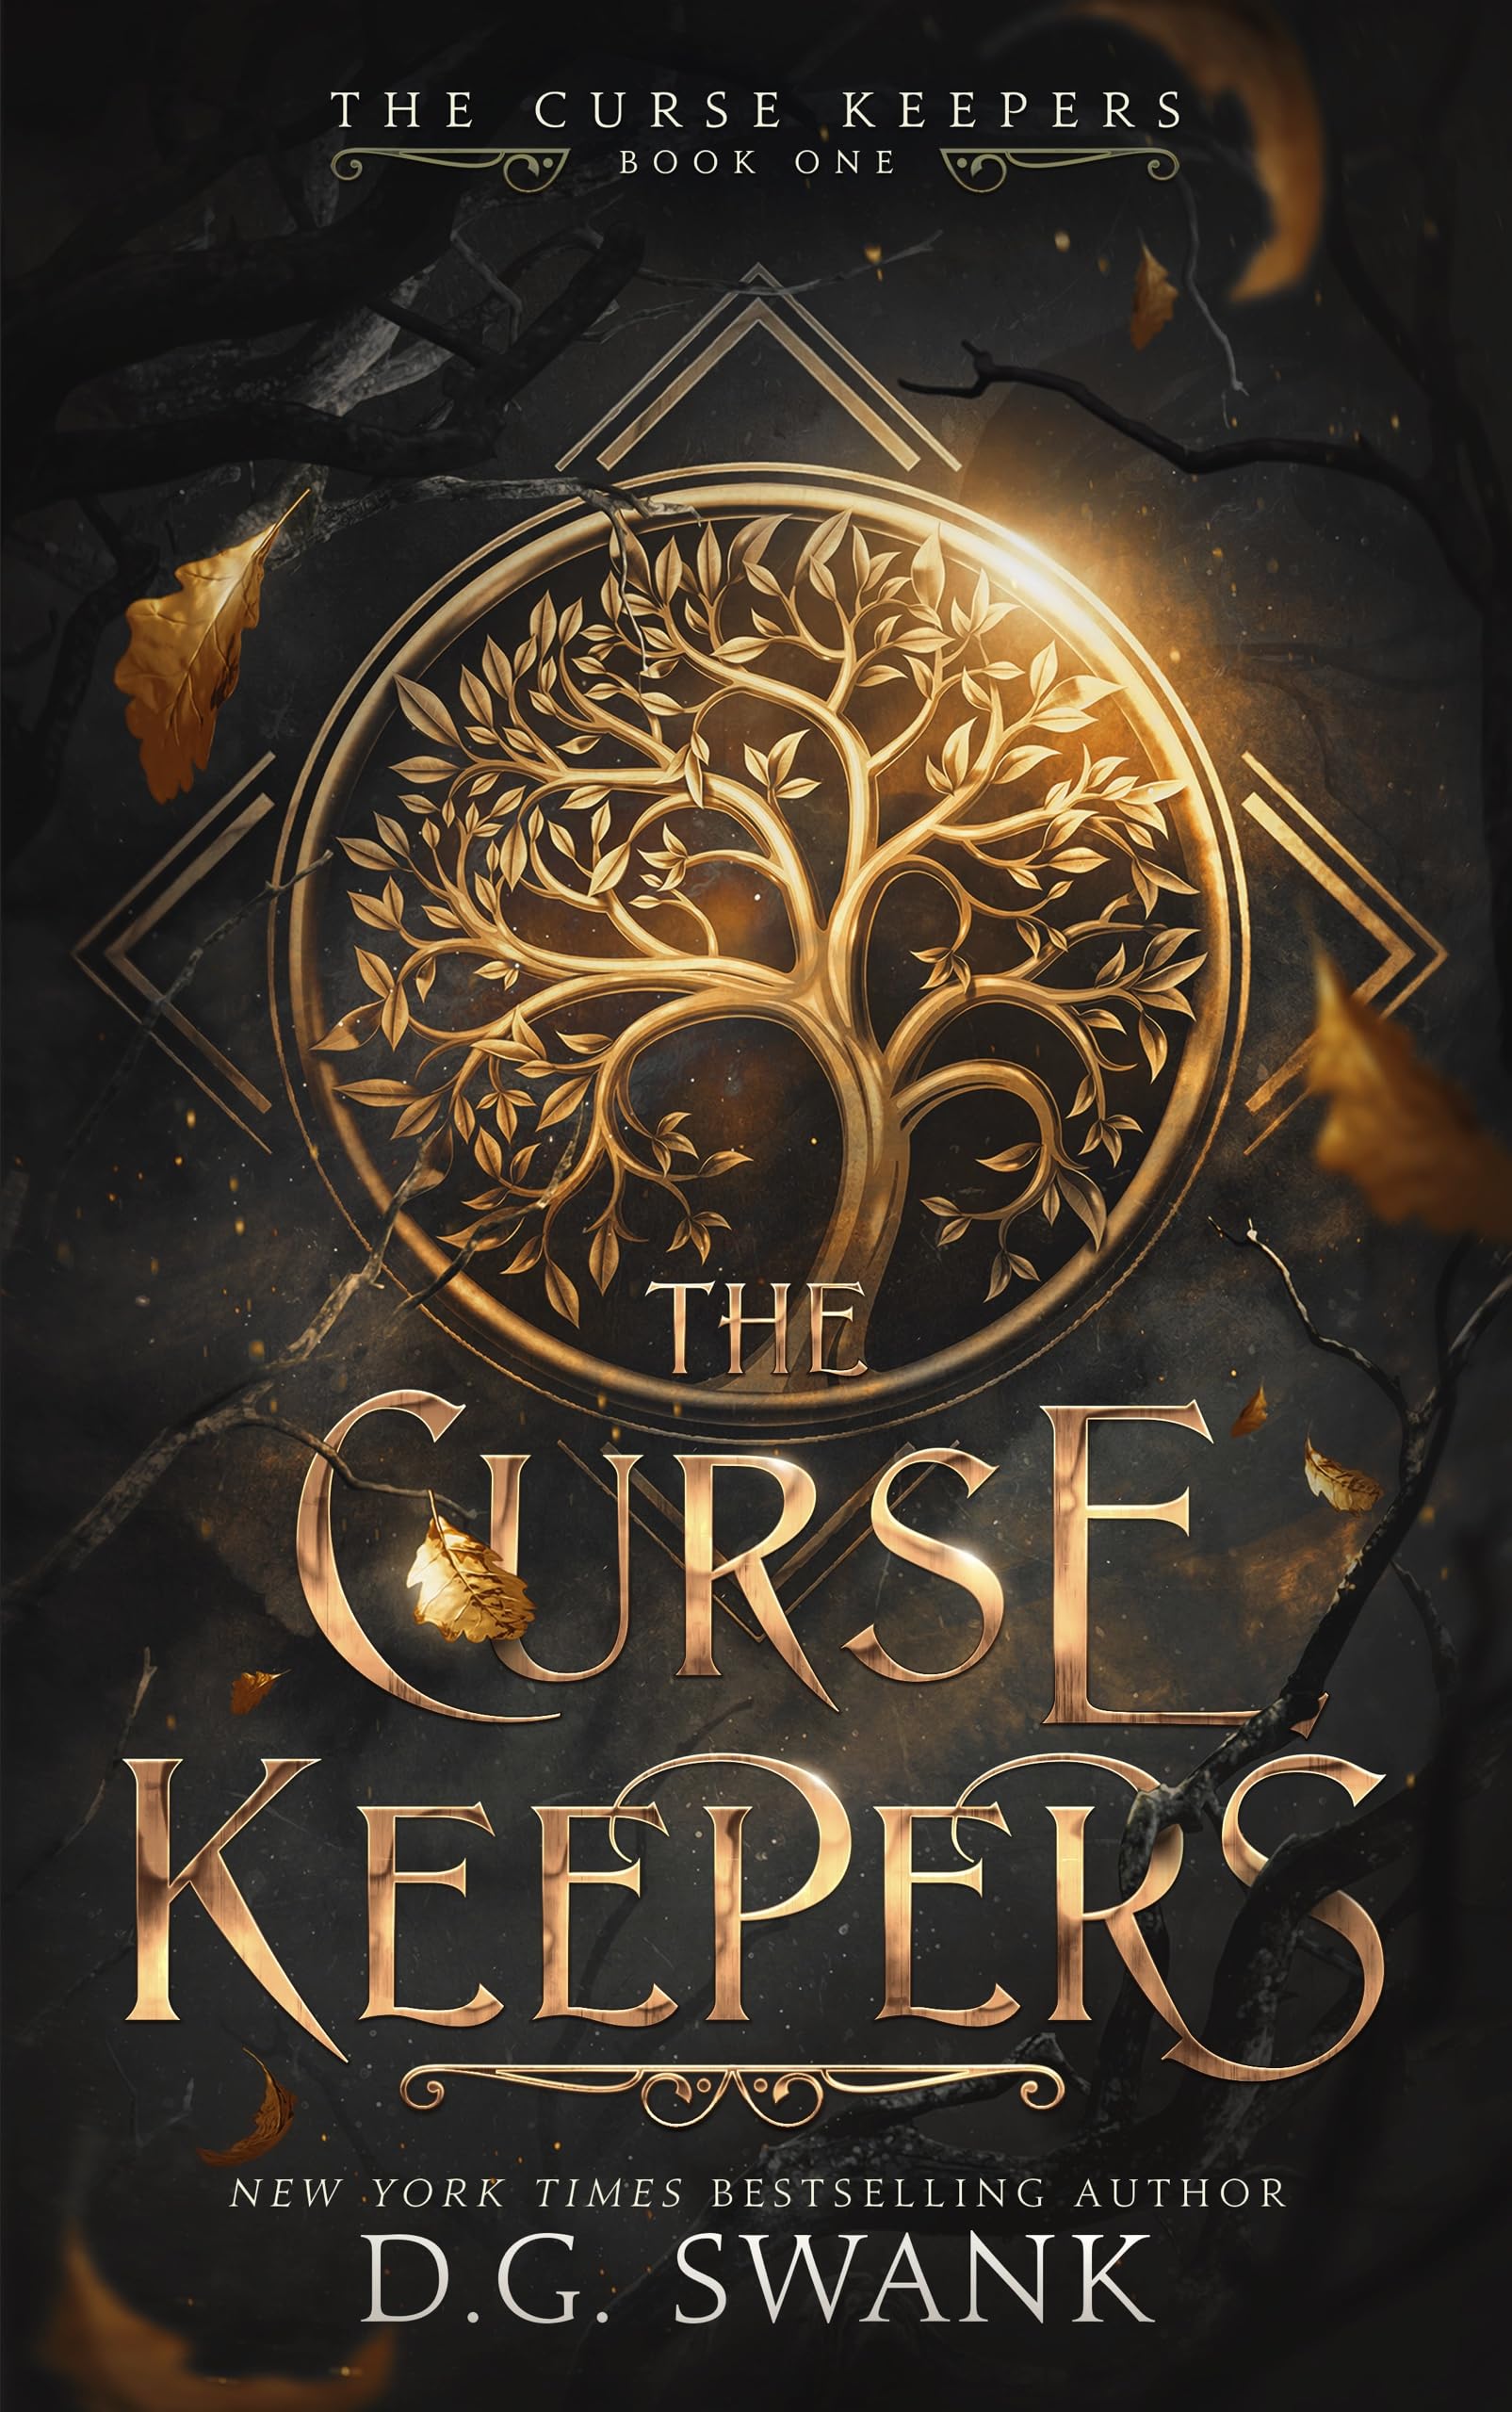 The Curse Keepers by D.G. Swank PDF Download